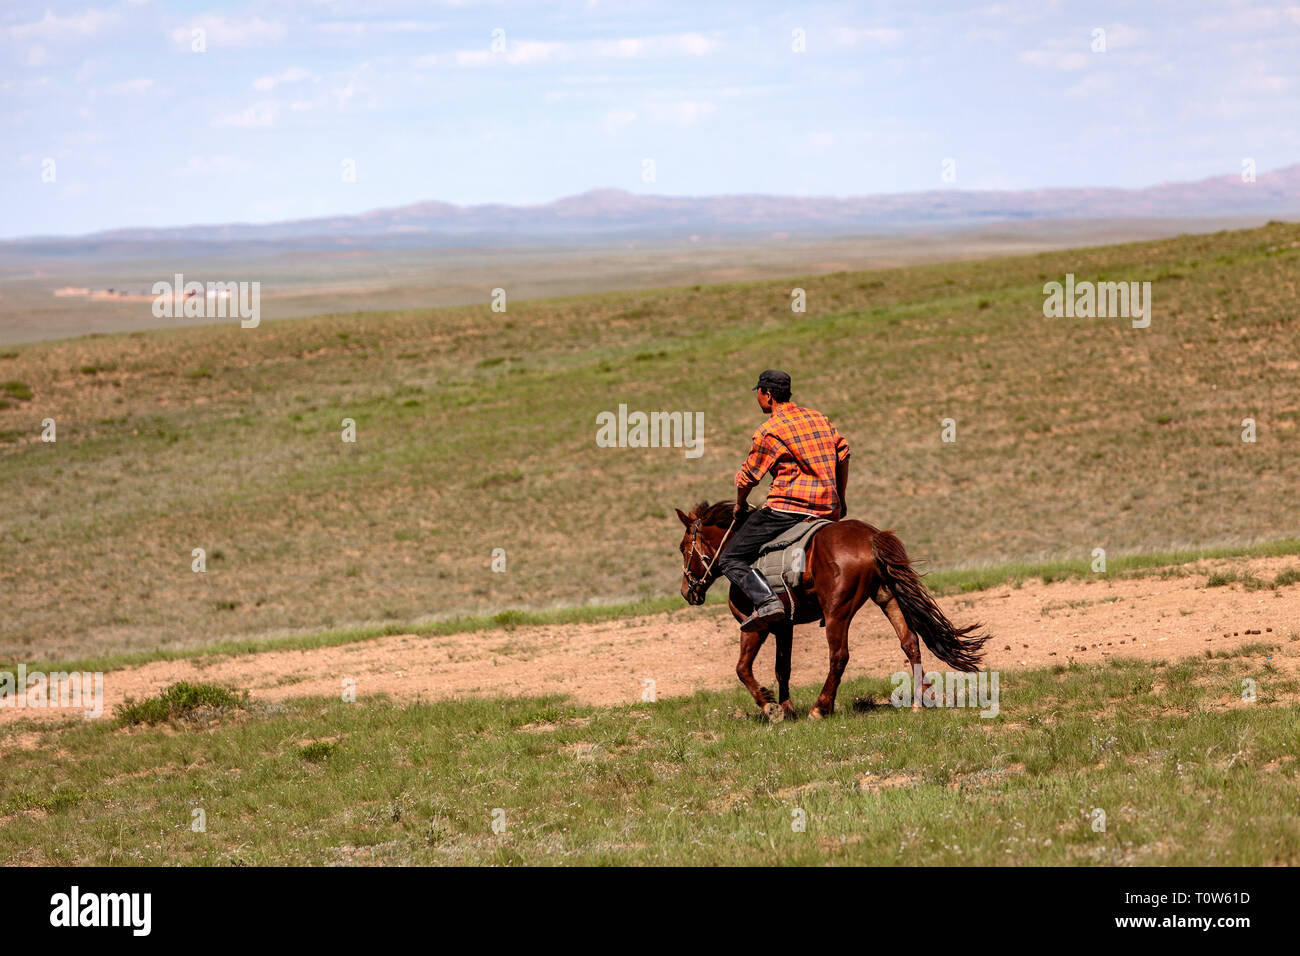 Horse and rider at the Gegentala grasslands north of Hohhot in Inner Mongolia, China. Stock Photo